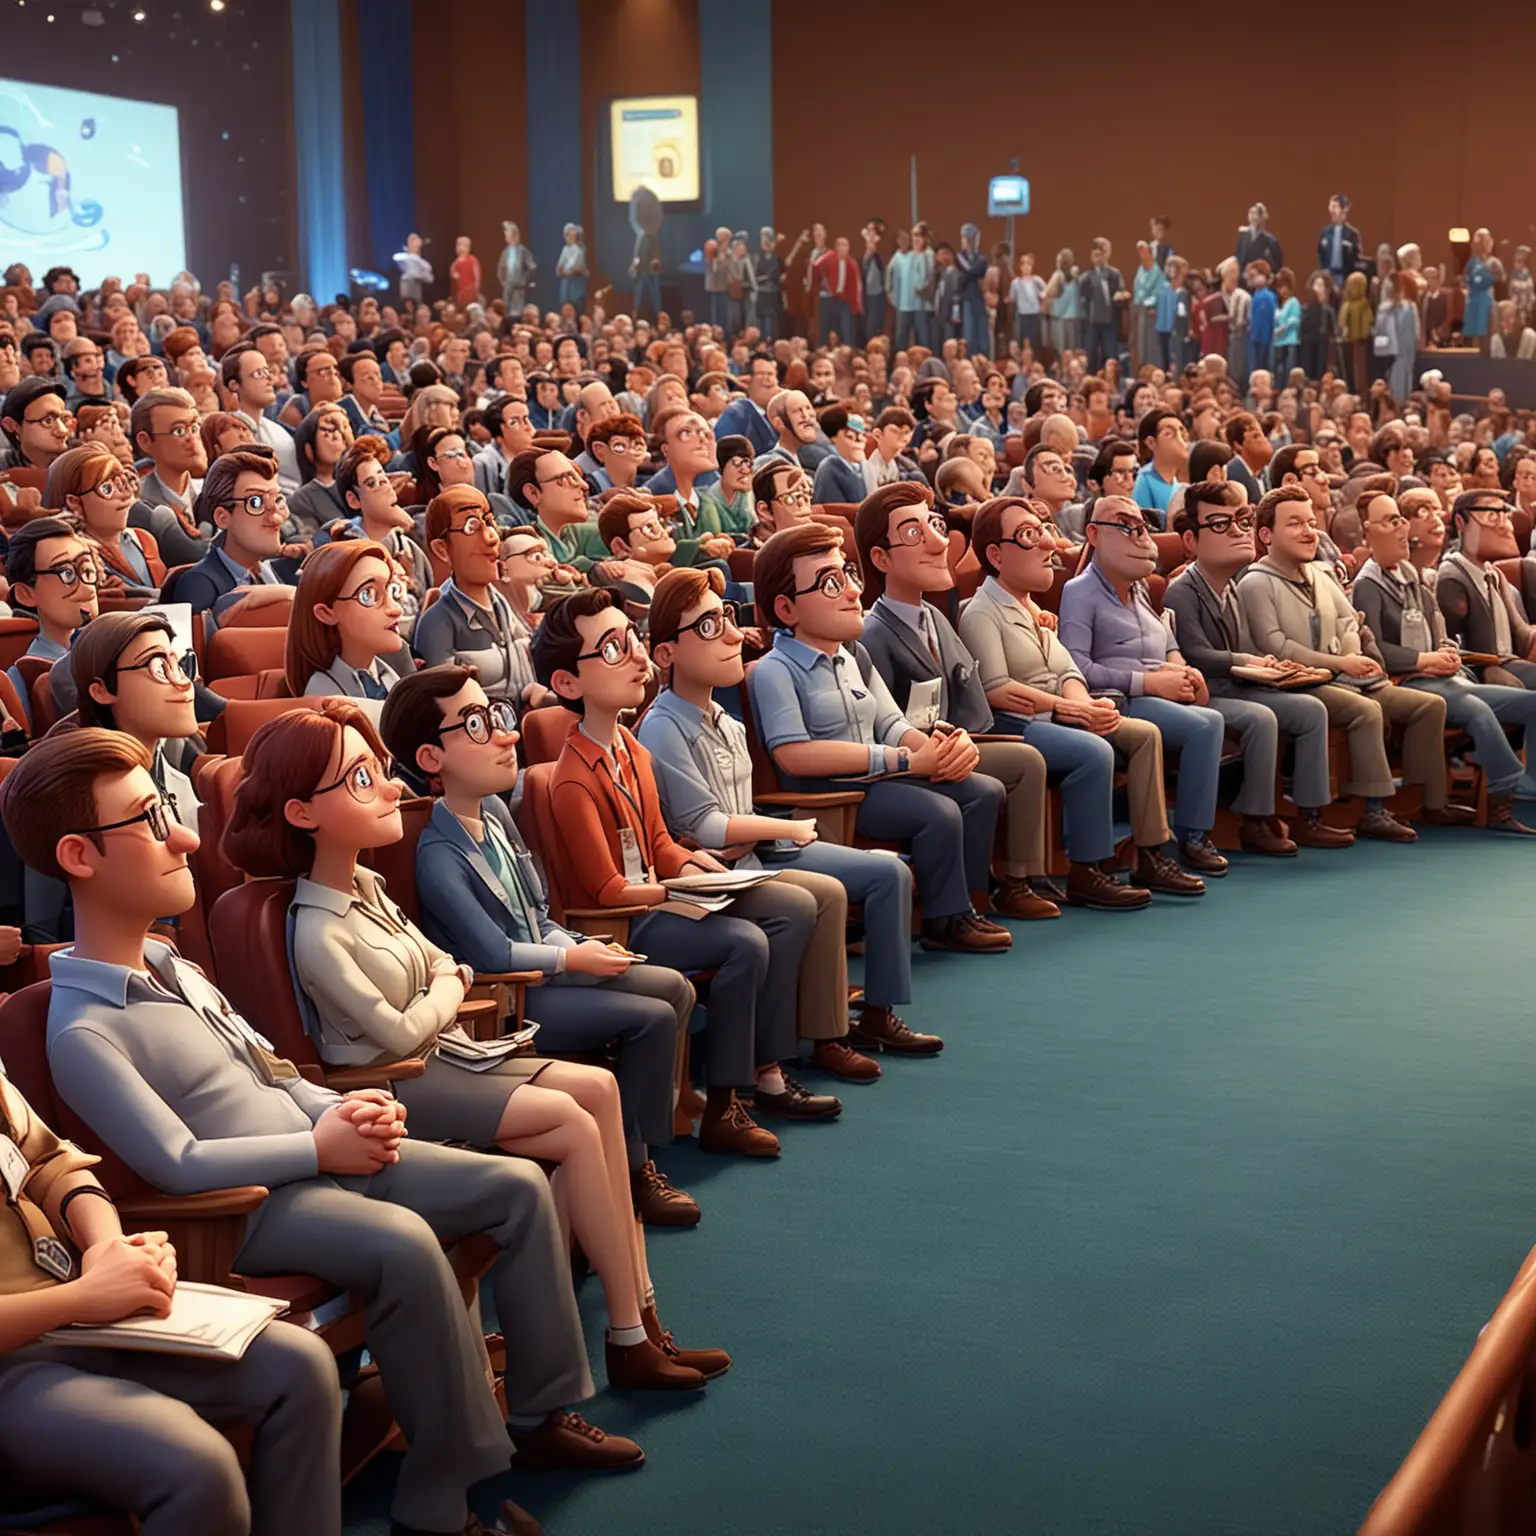 A comical scene inside a science conference depicted in Disney Pixar 3D animation style. many people sitting in a conference.